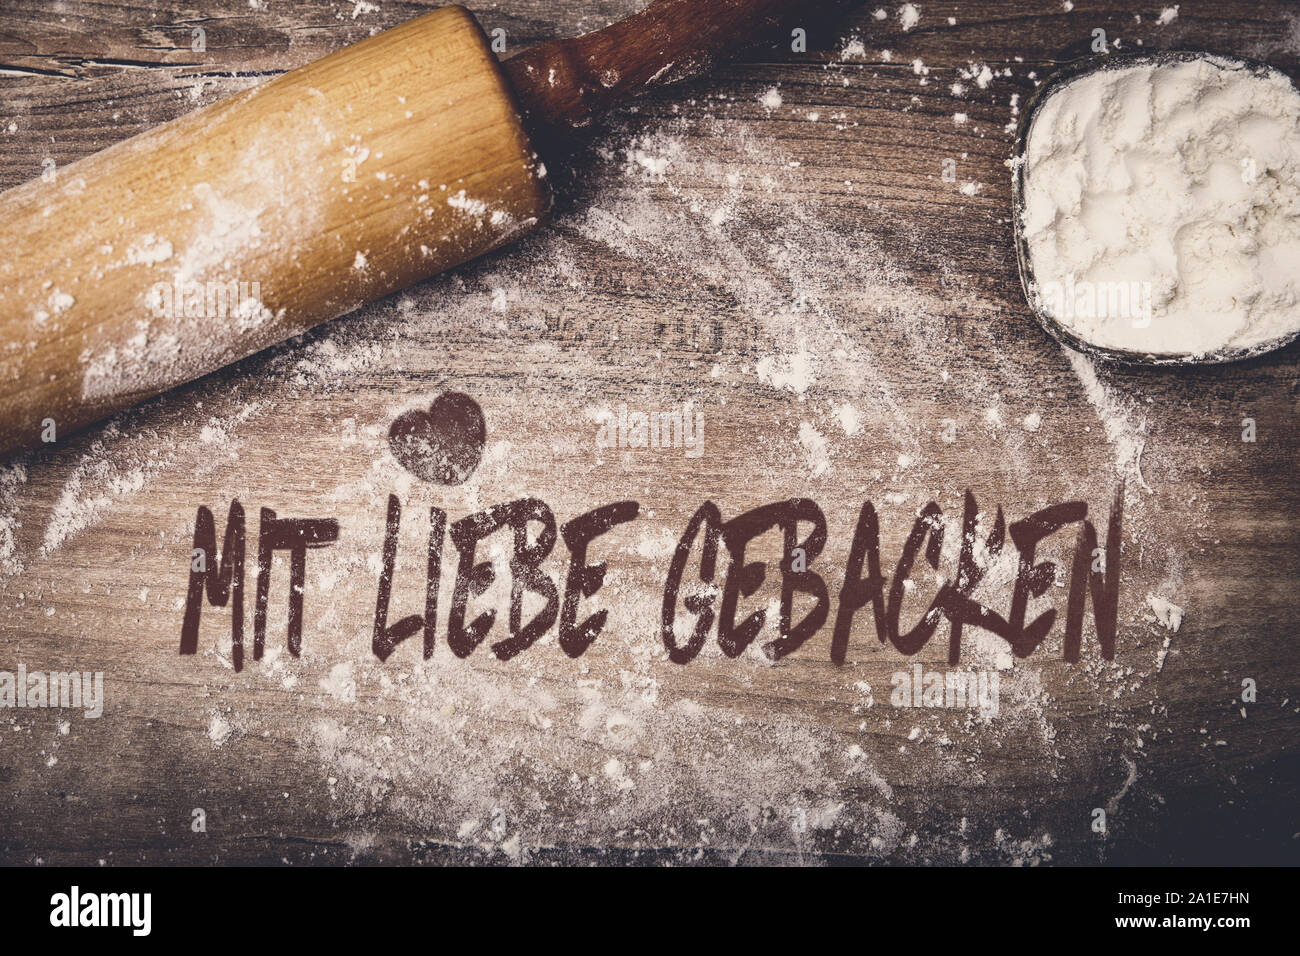 Dough roll and flour on wooden table, german text mit liebe gebacken which means baked with love Stock Photo